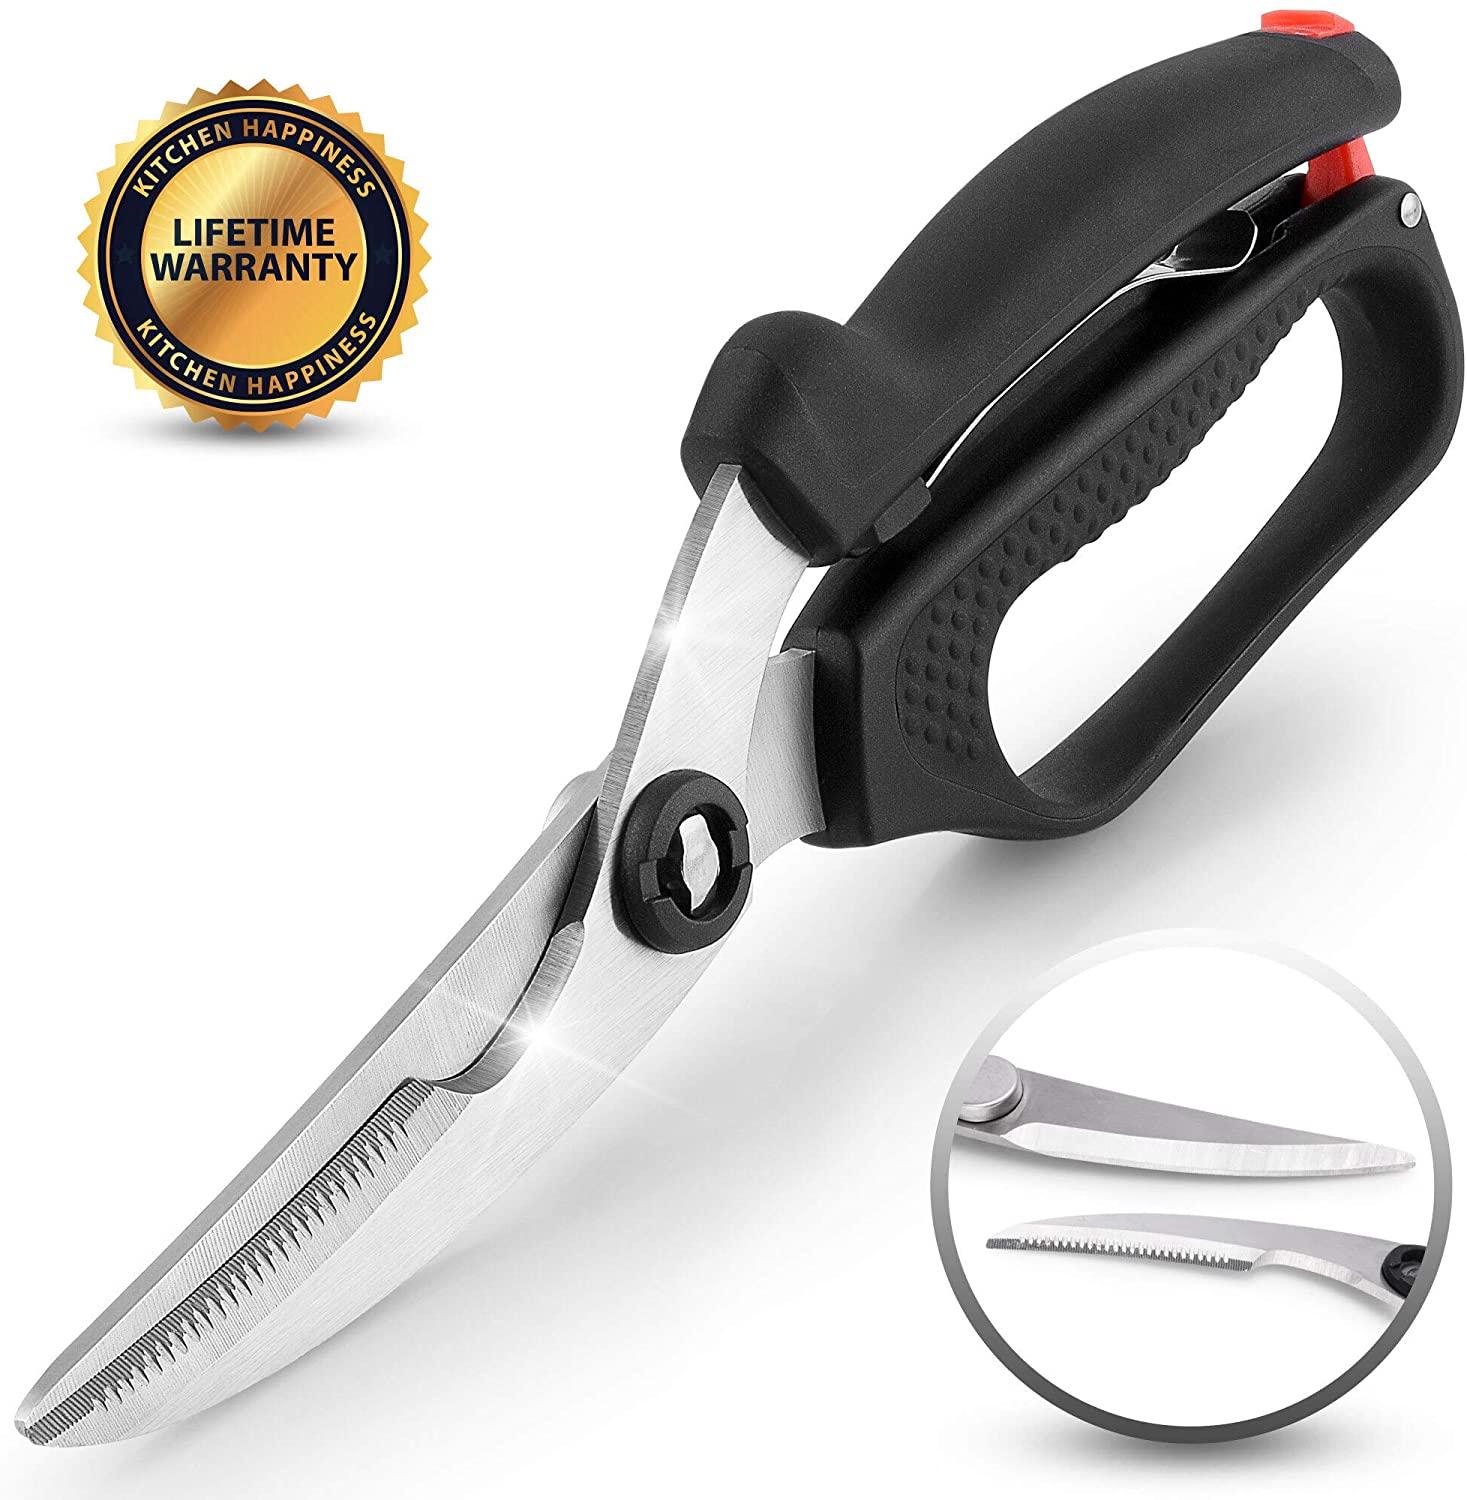 Poultry Shears - Zulay KitchenZulay Kitchen